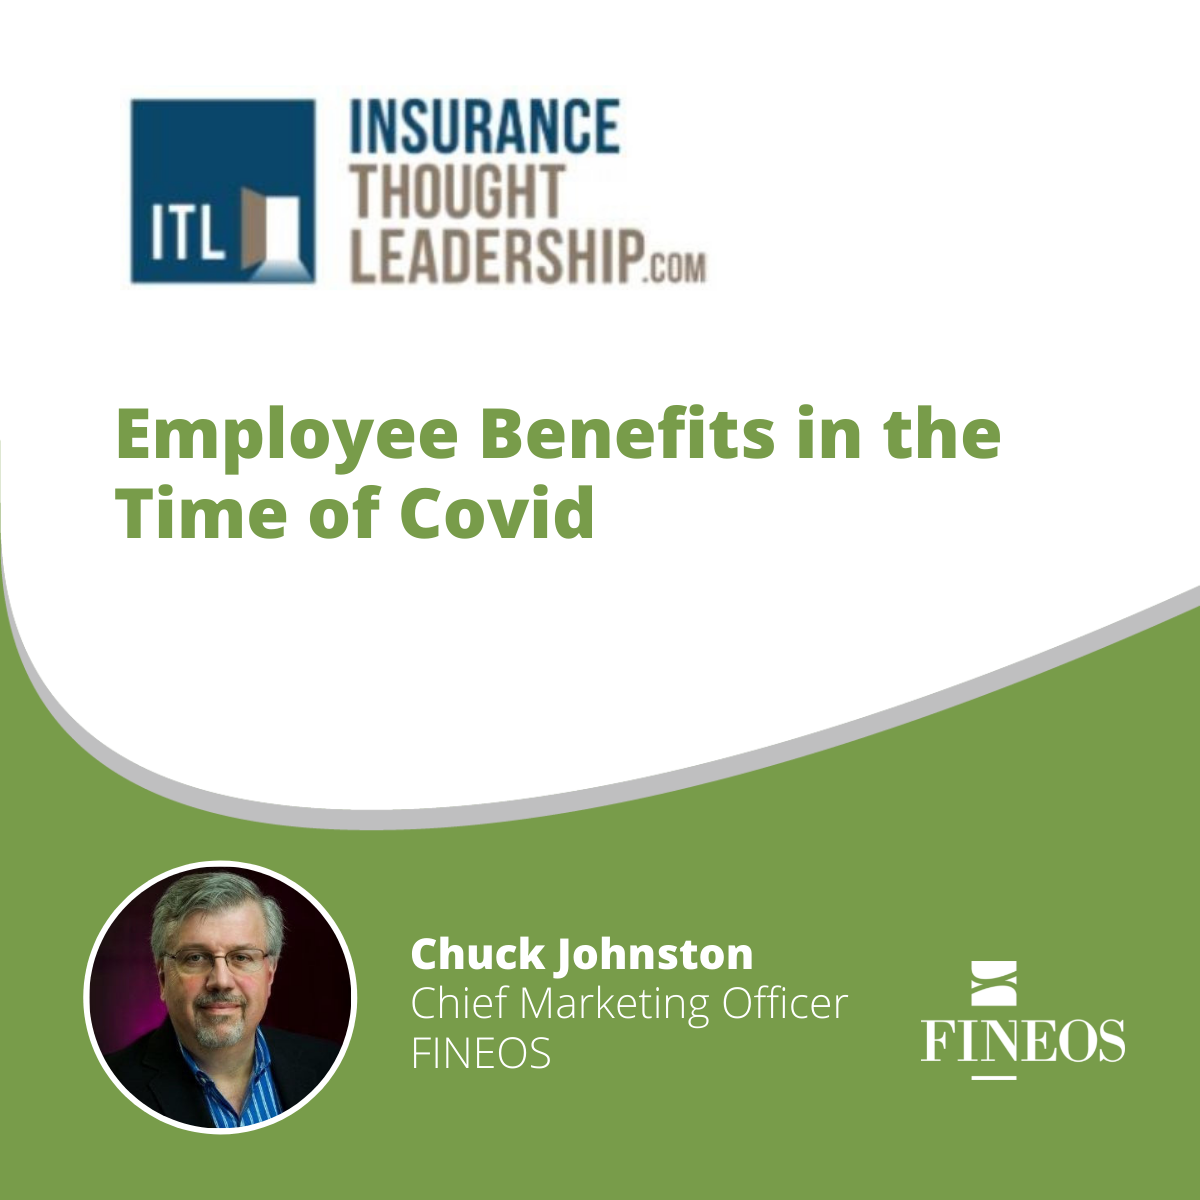 Employee Benefits in the Time of Covid